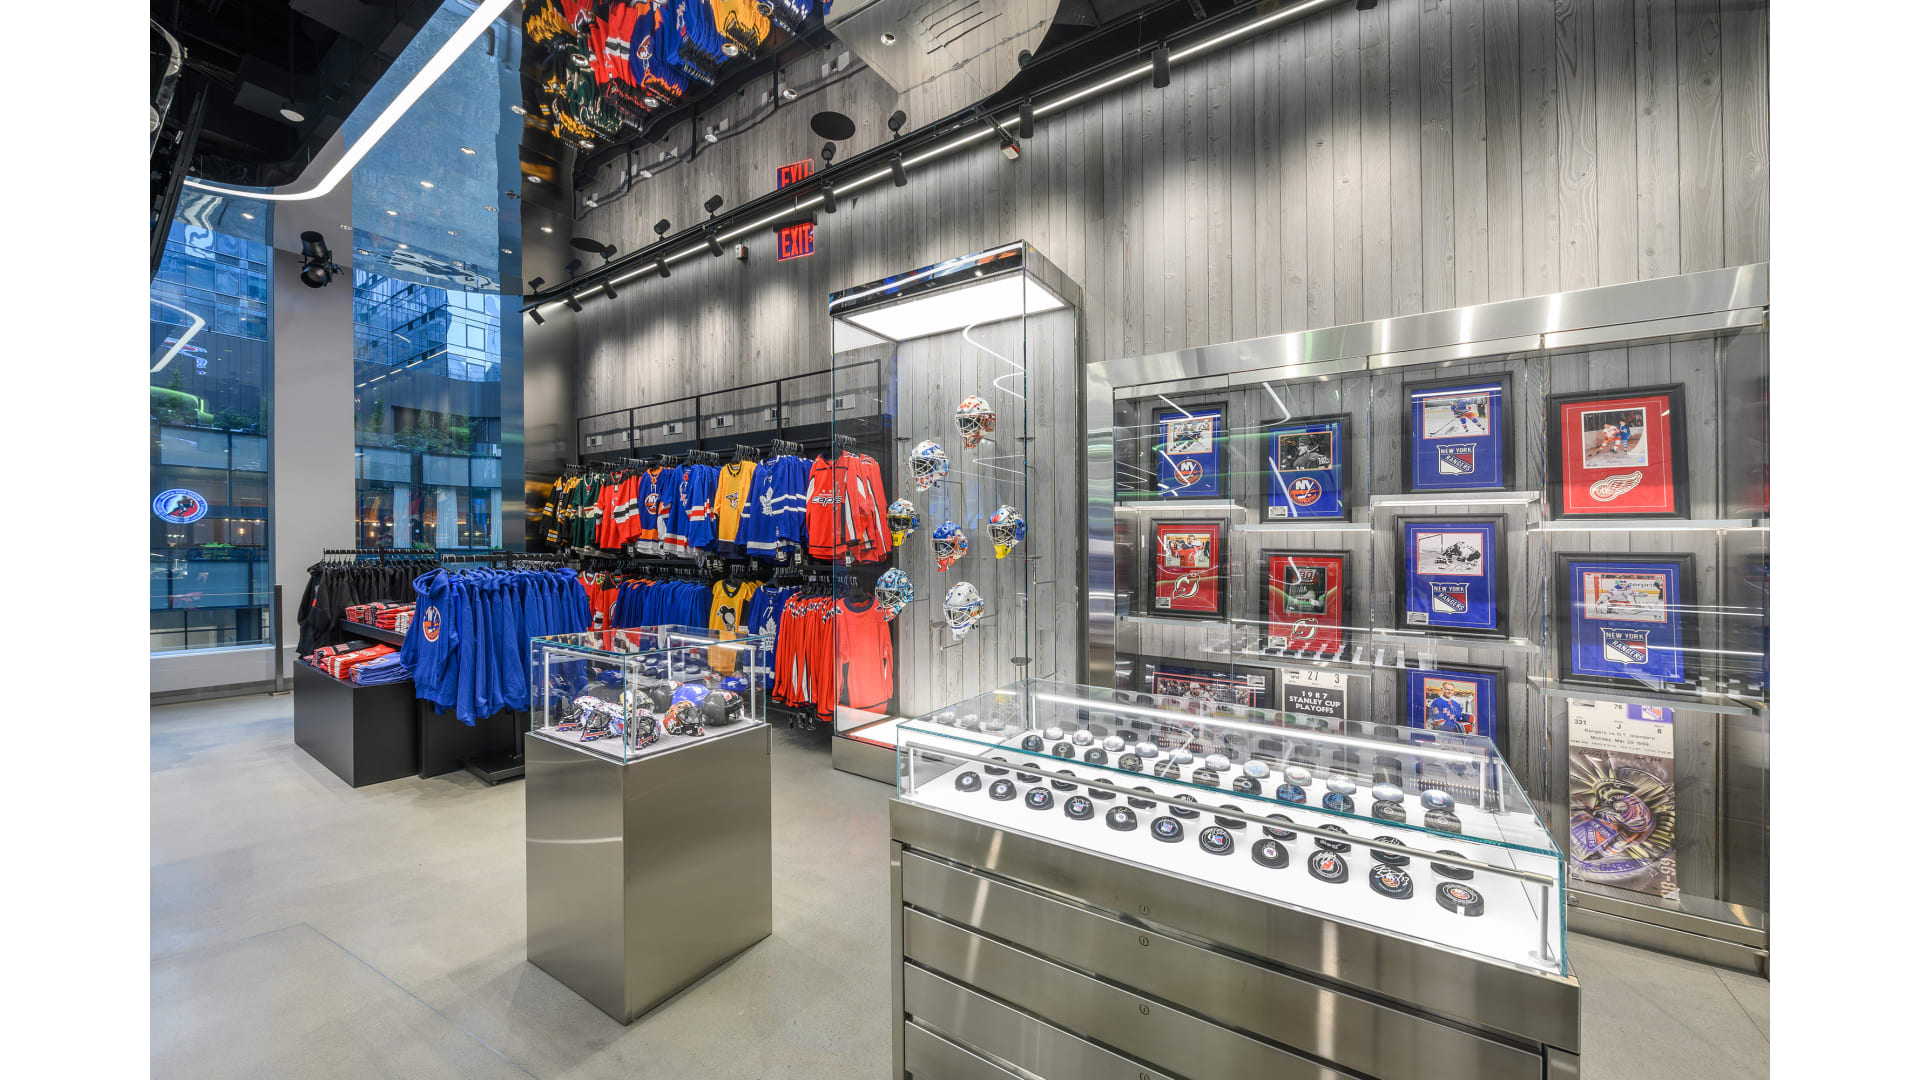 Gear up at the NHL flagship store in Manhattan 